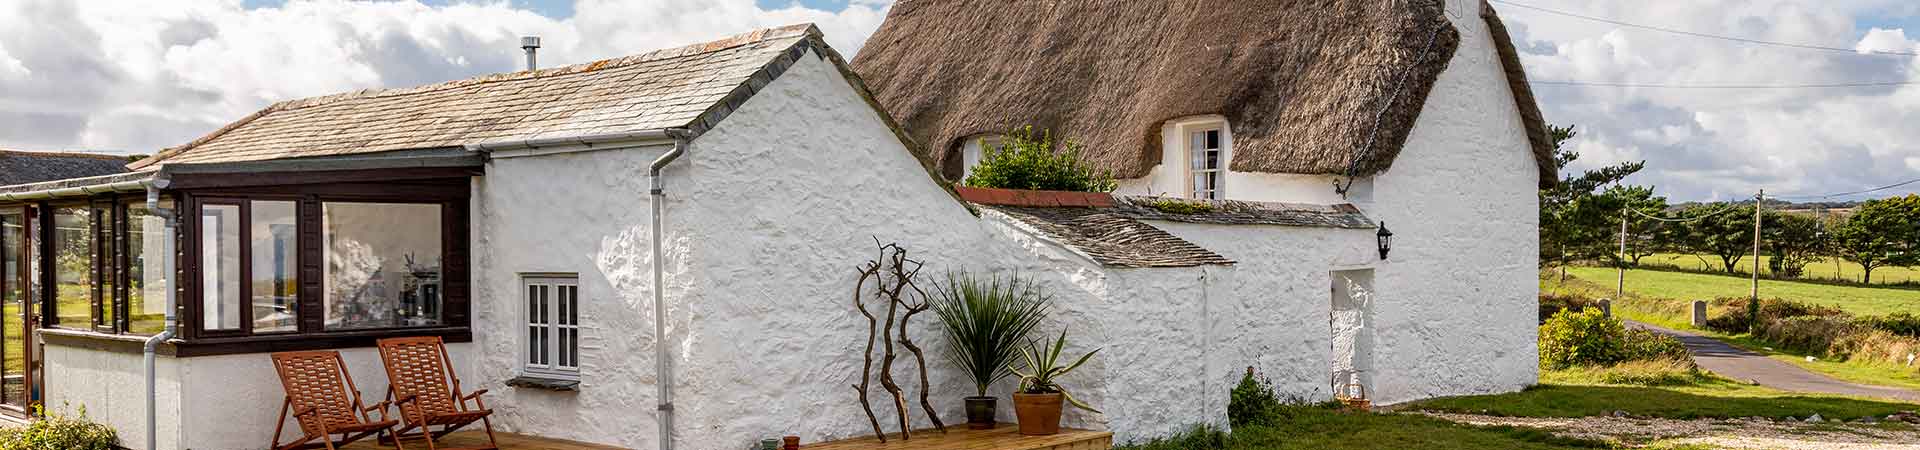 Thatched holiday cottages in Carmarthenshire